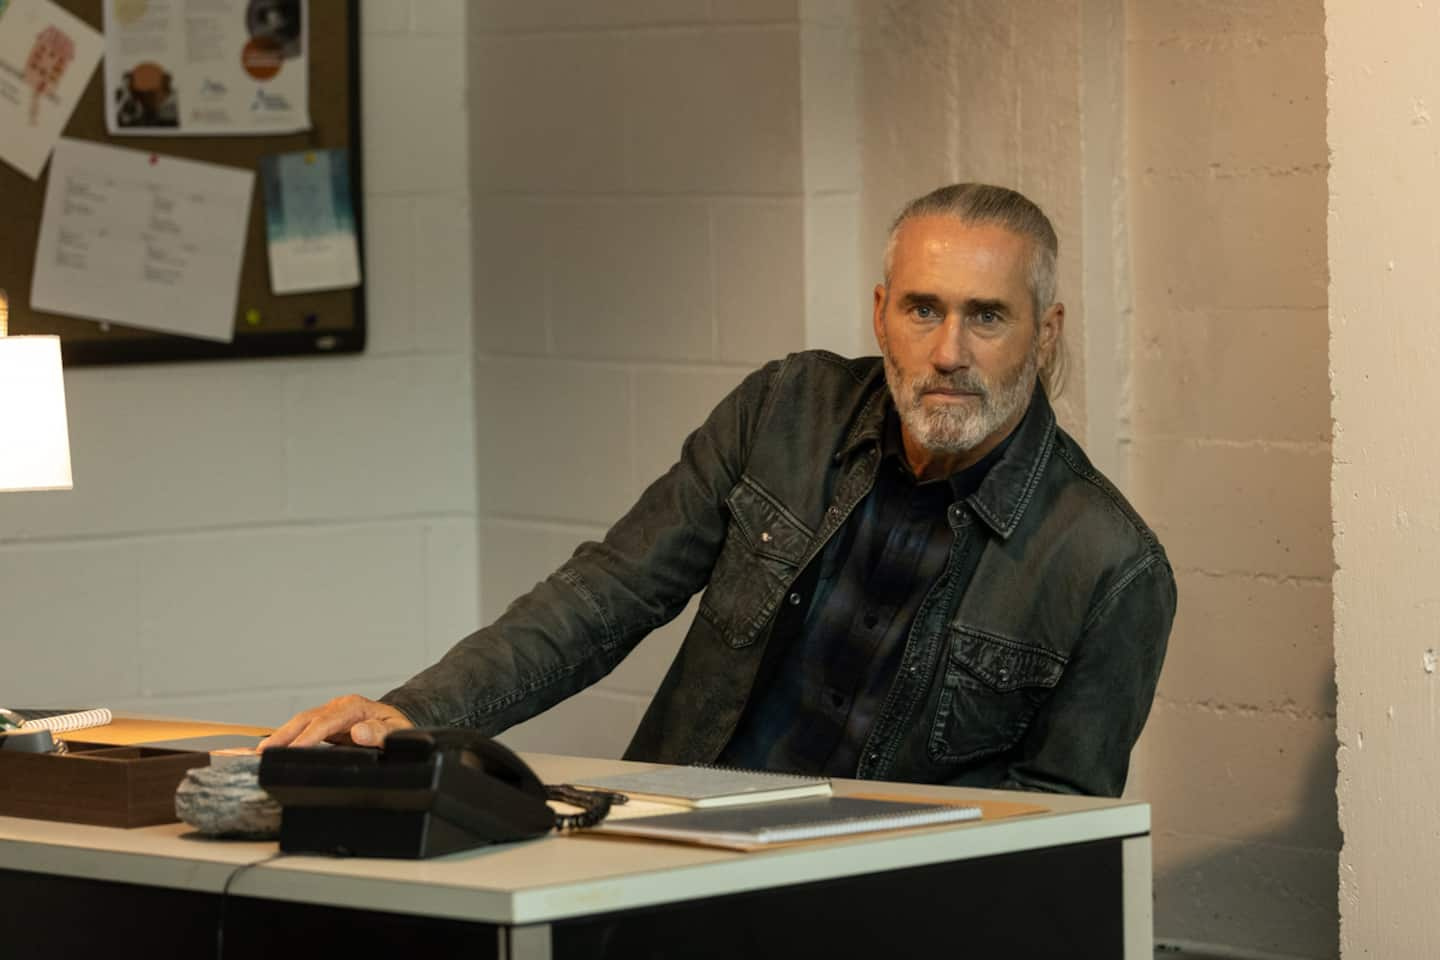 Return of his character in “À cœur beating”: Roy Dupuis inspired by his difficult past